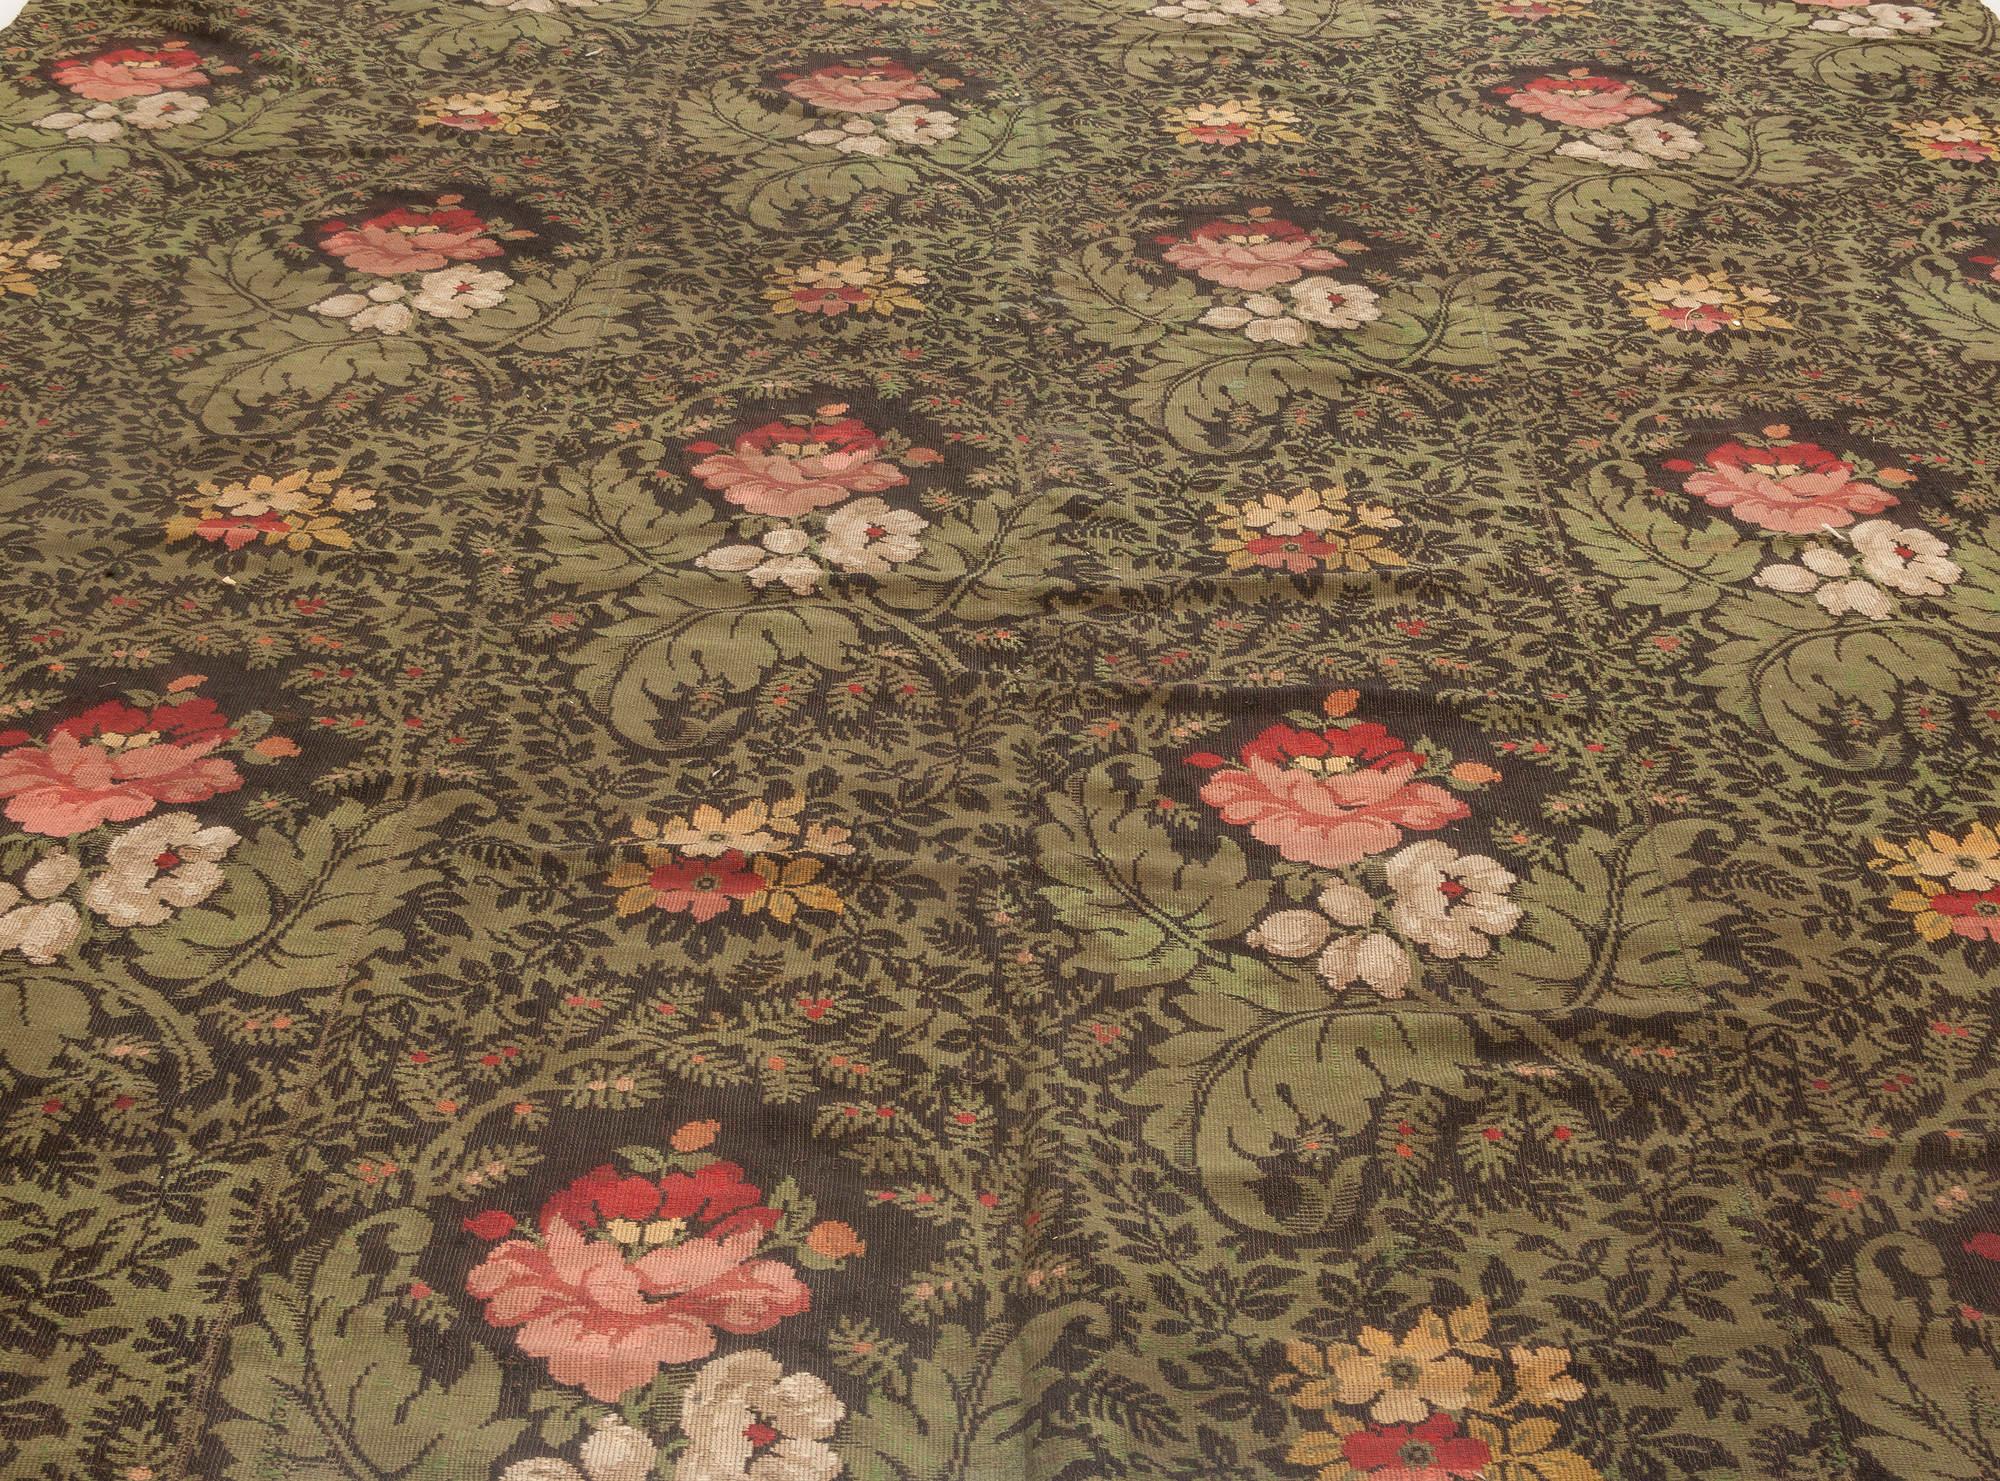 19th Century French Floral Design Green, Black and Pink Flat Weave Wool Rug
Size: 9'4